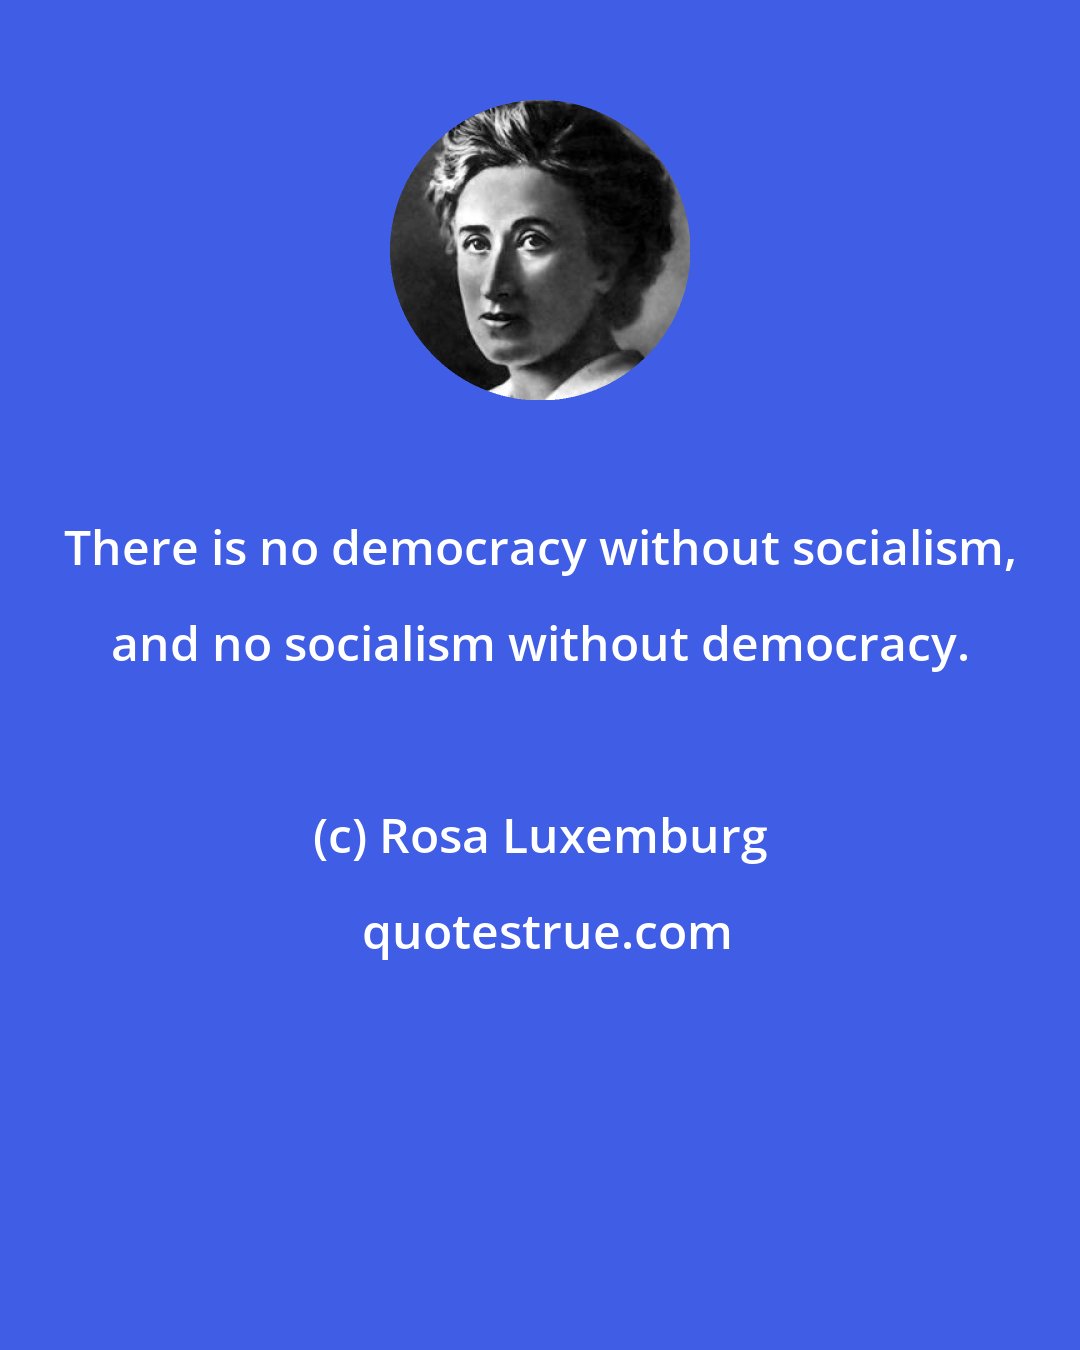 Rosa Luxemburg: There is no democracy without socialism, and no socialism without democracy.